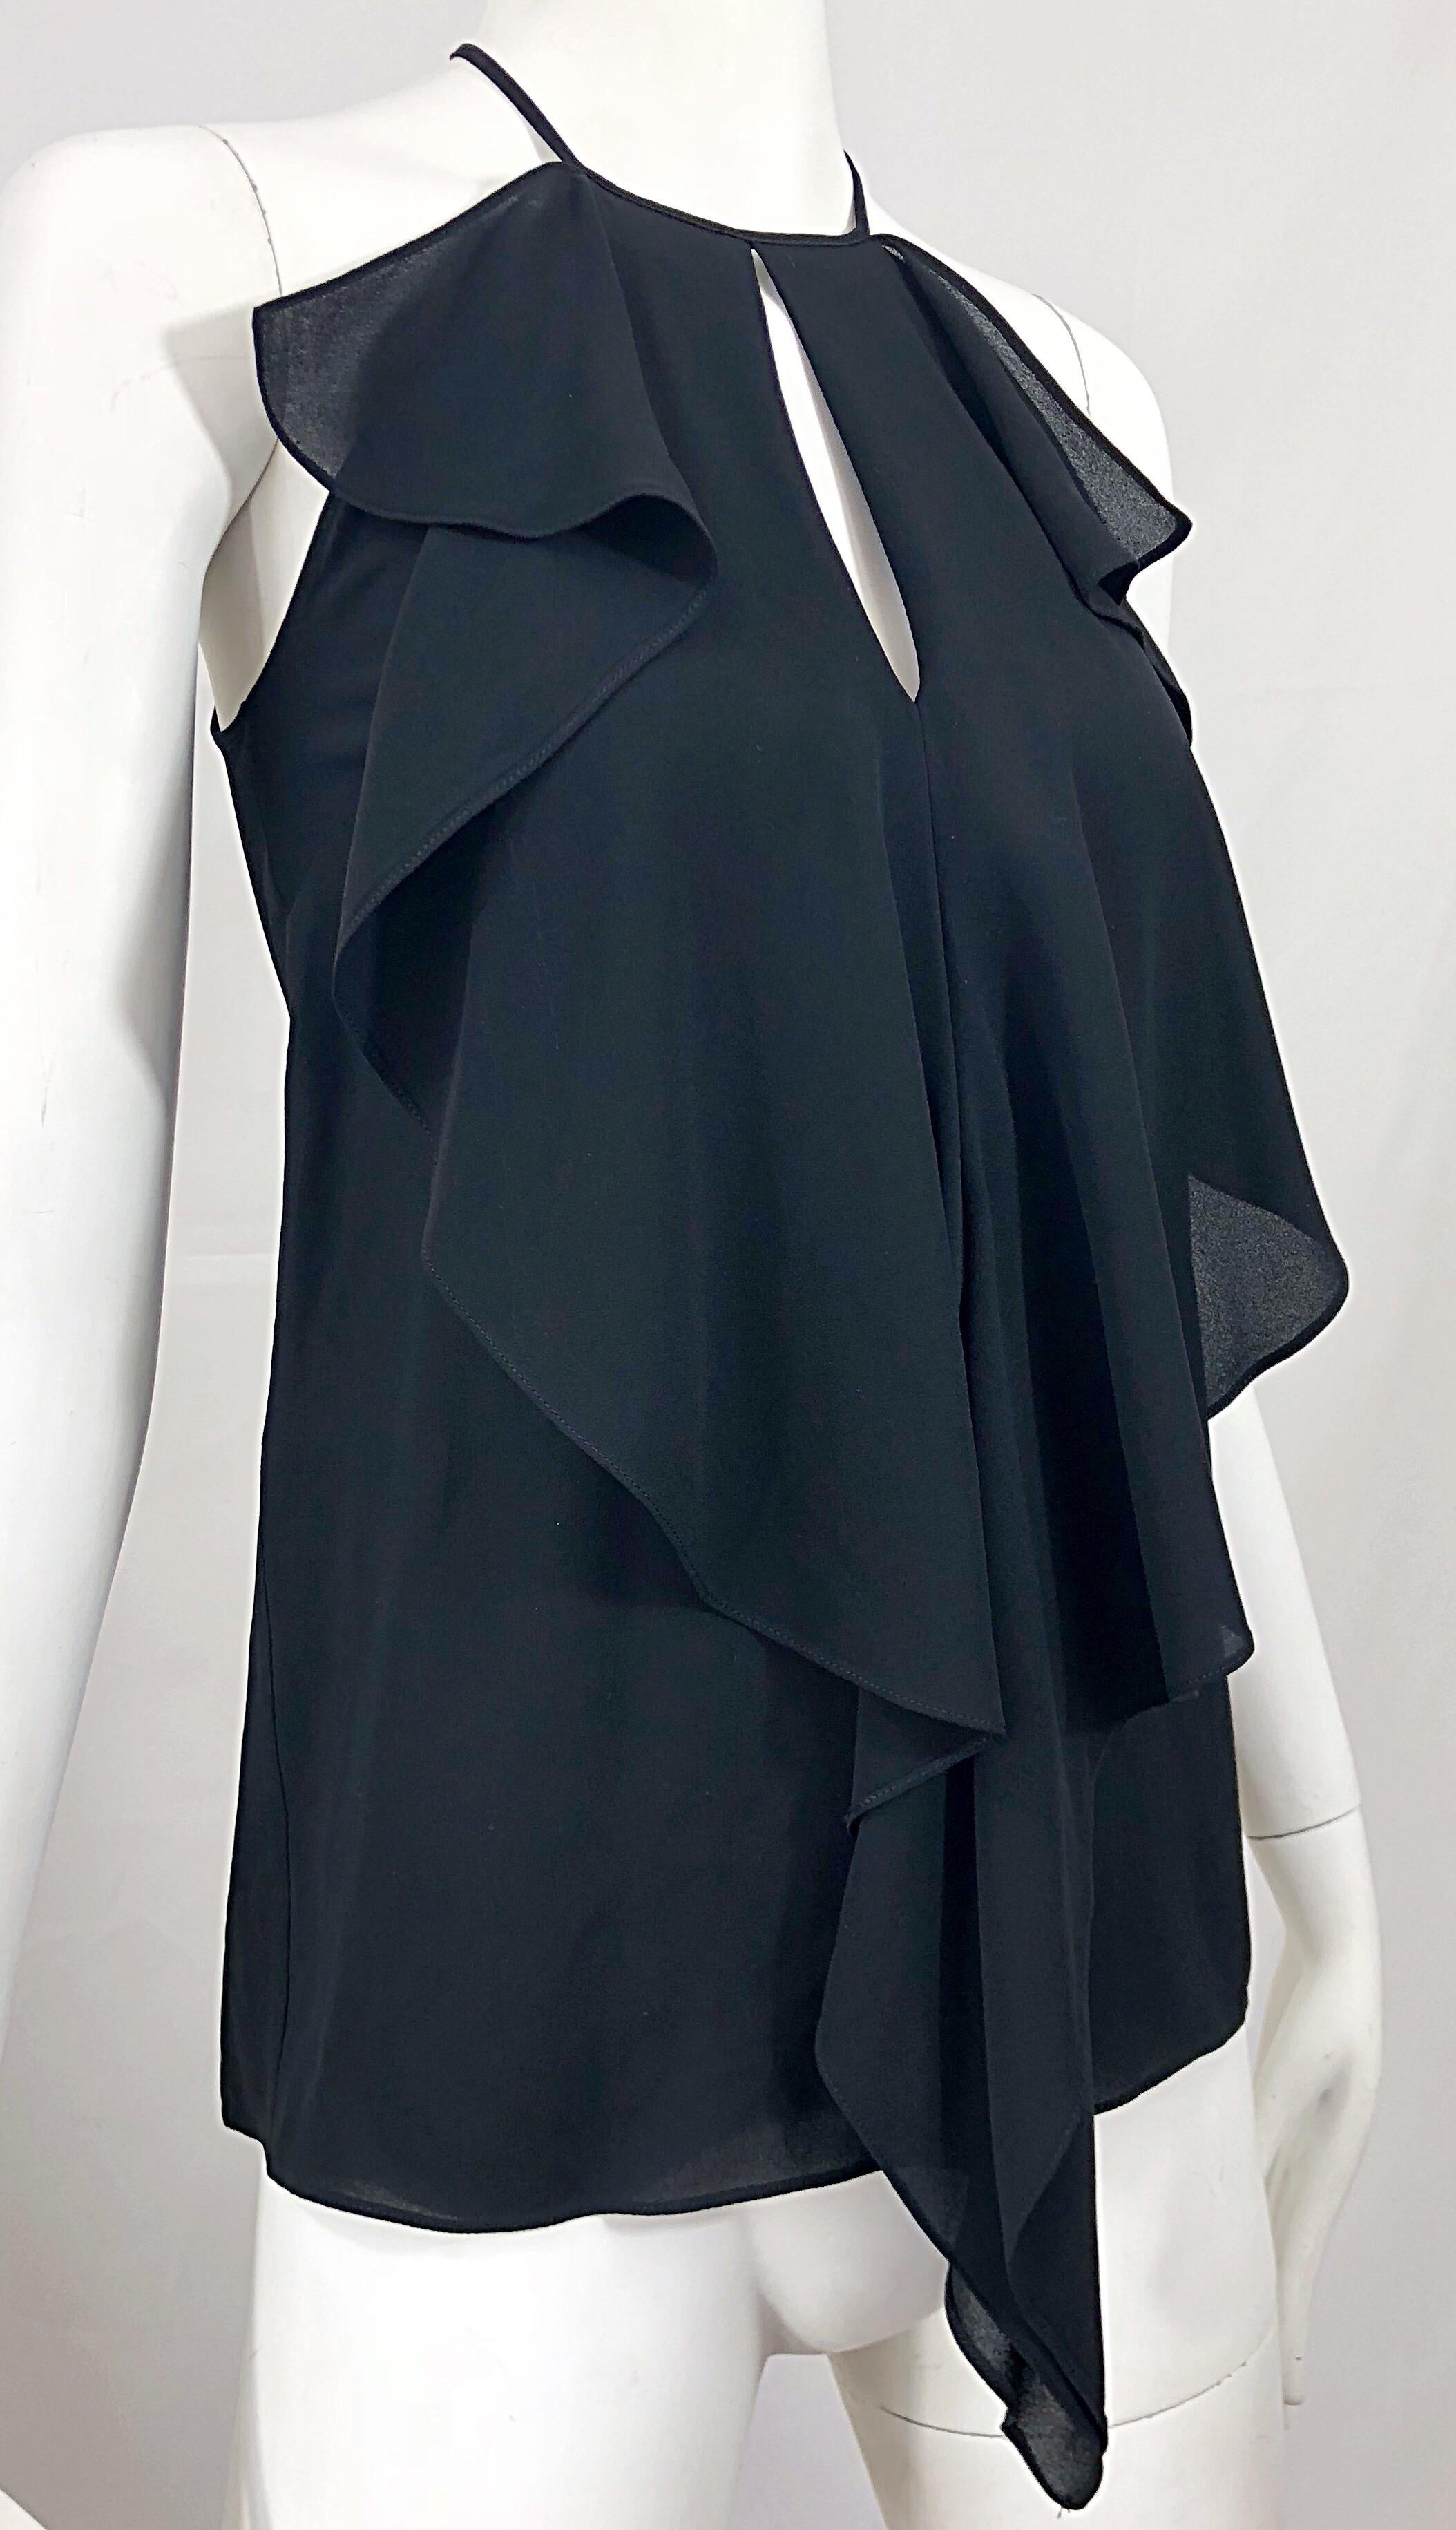 Michael Kors Collection Early 2000s Size 2 / 4 Black Silk Chiffon Sleeveless Top For Sale 1